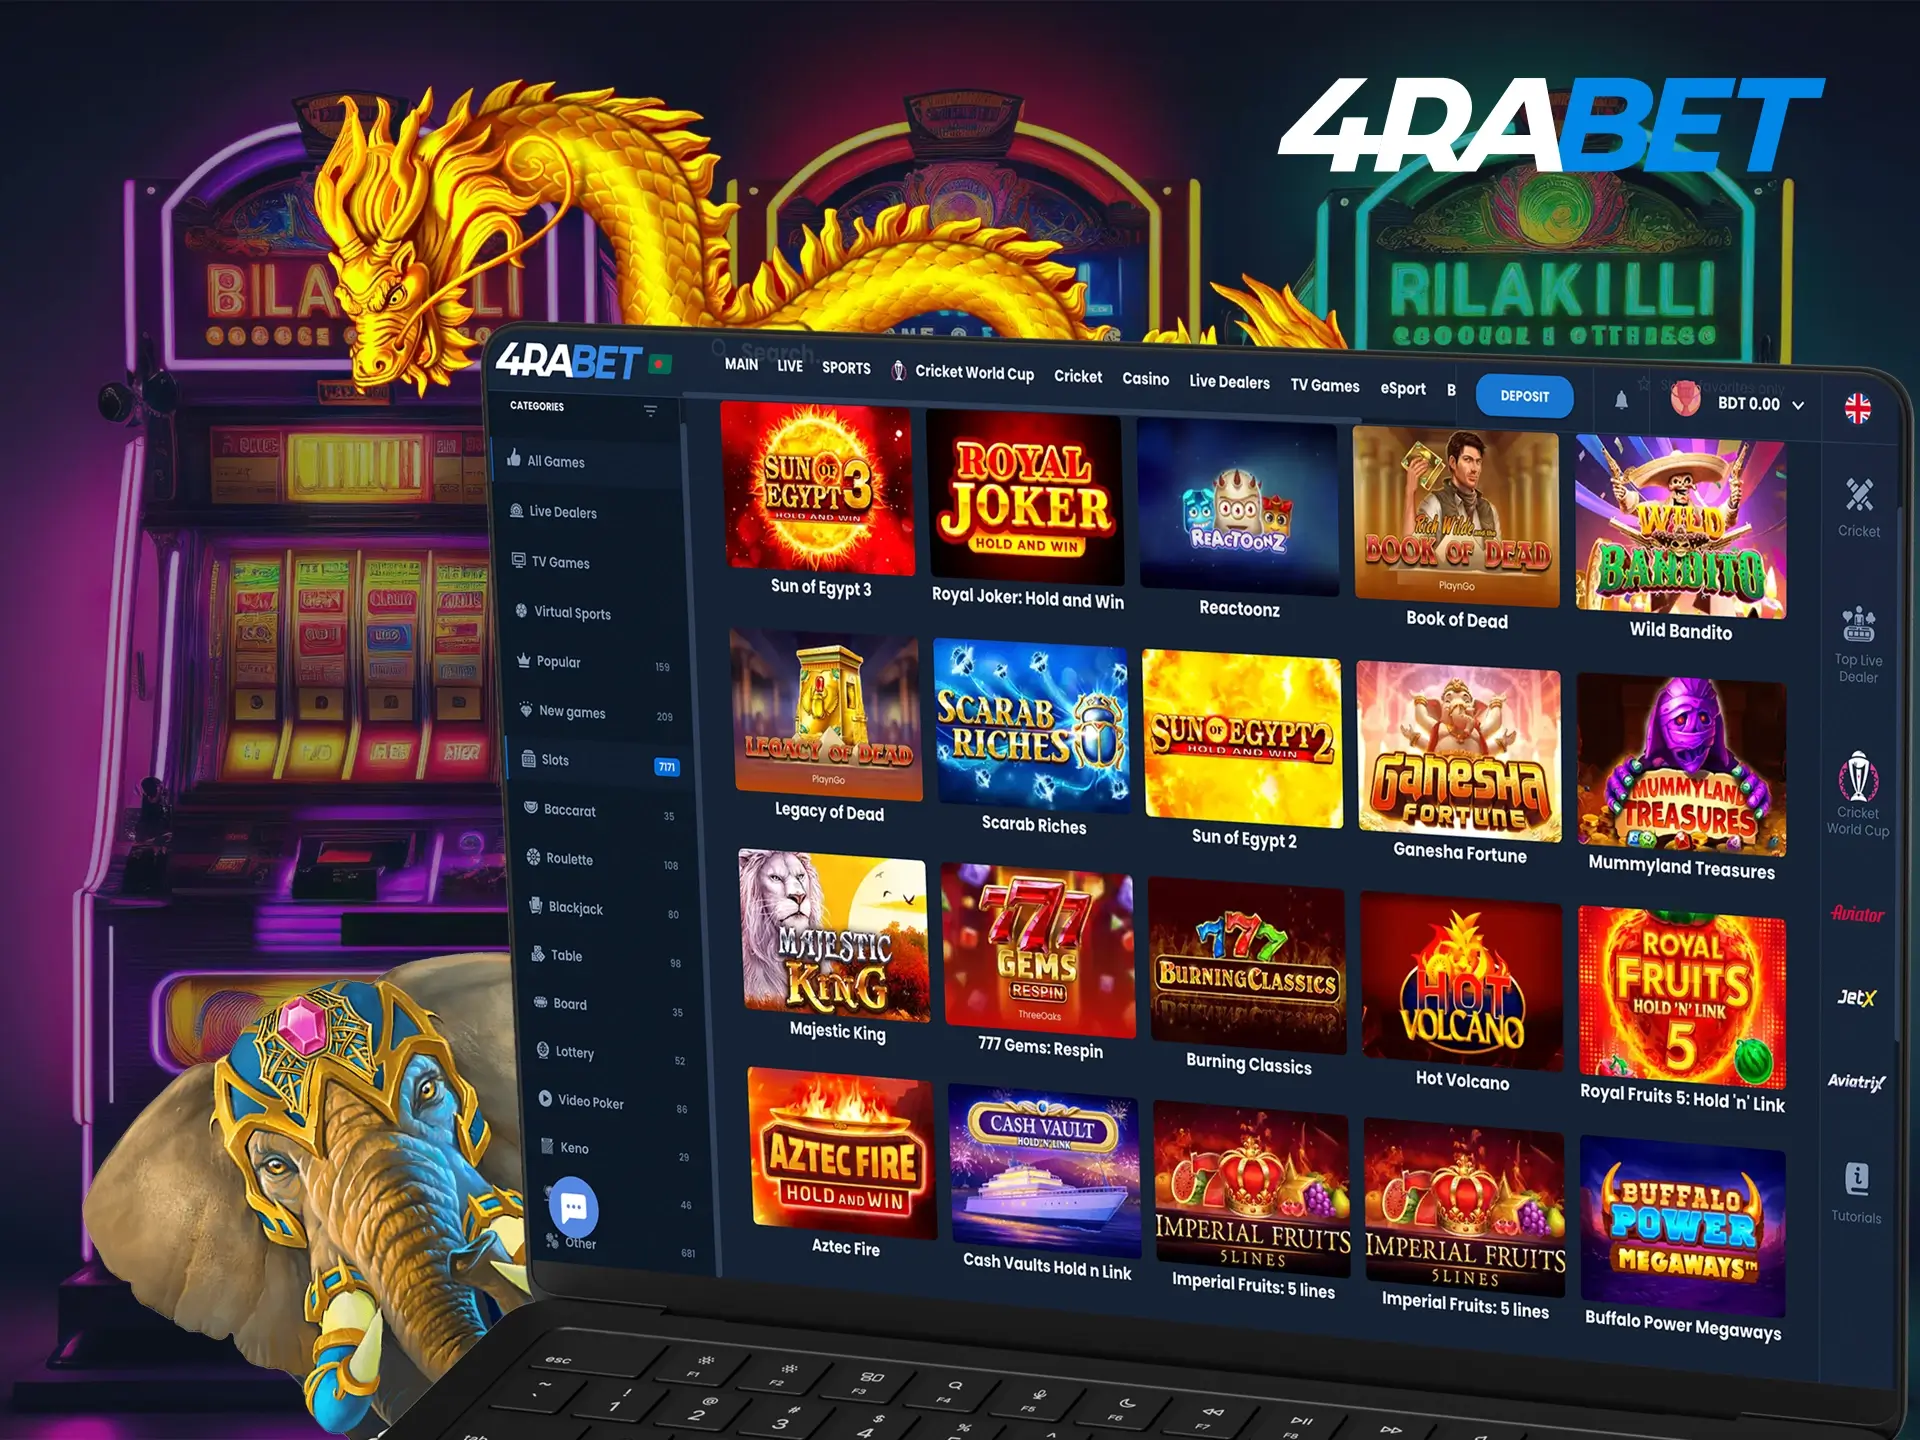 Get to know the slots and get free spins as you play your games.